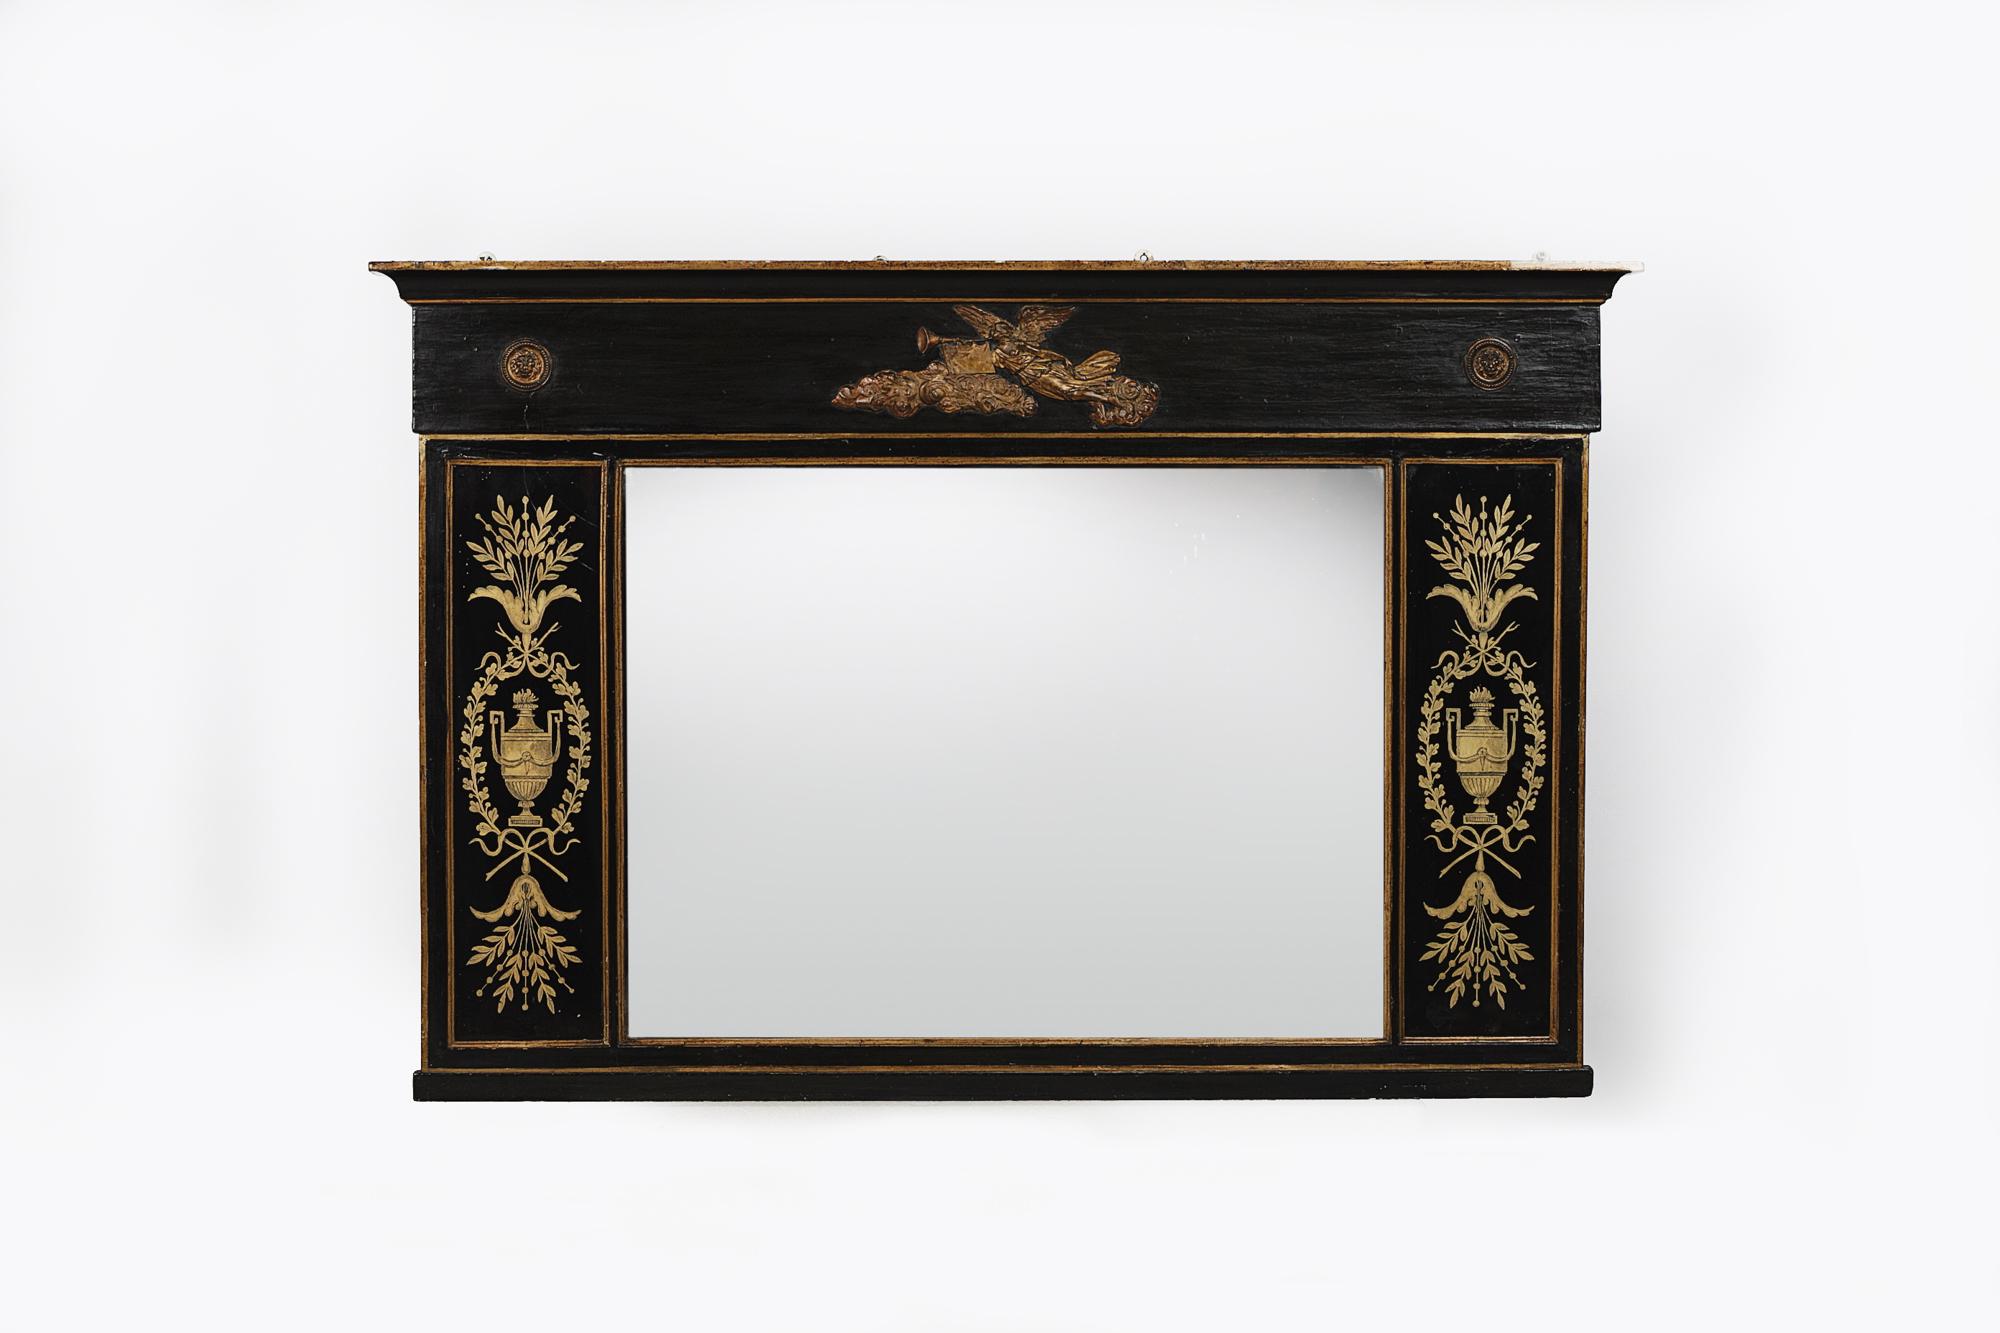 19th century Regency mirror flanked by églomisé panels. The frieze adorned by a gilt angel with trumpet. The églomisé panels decorated with urns, swags and floral motifs.